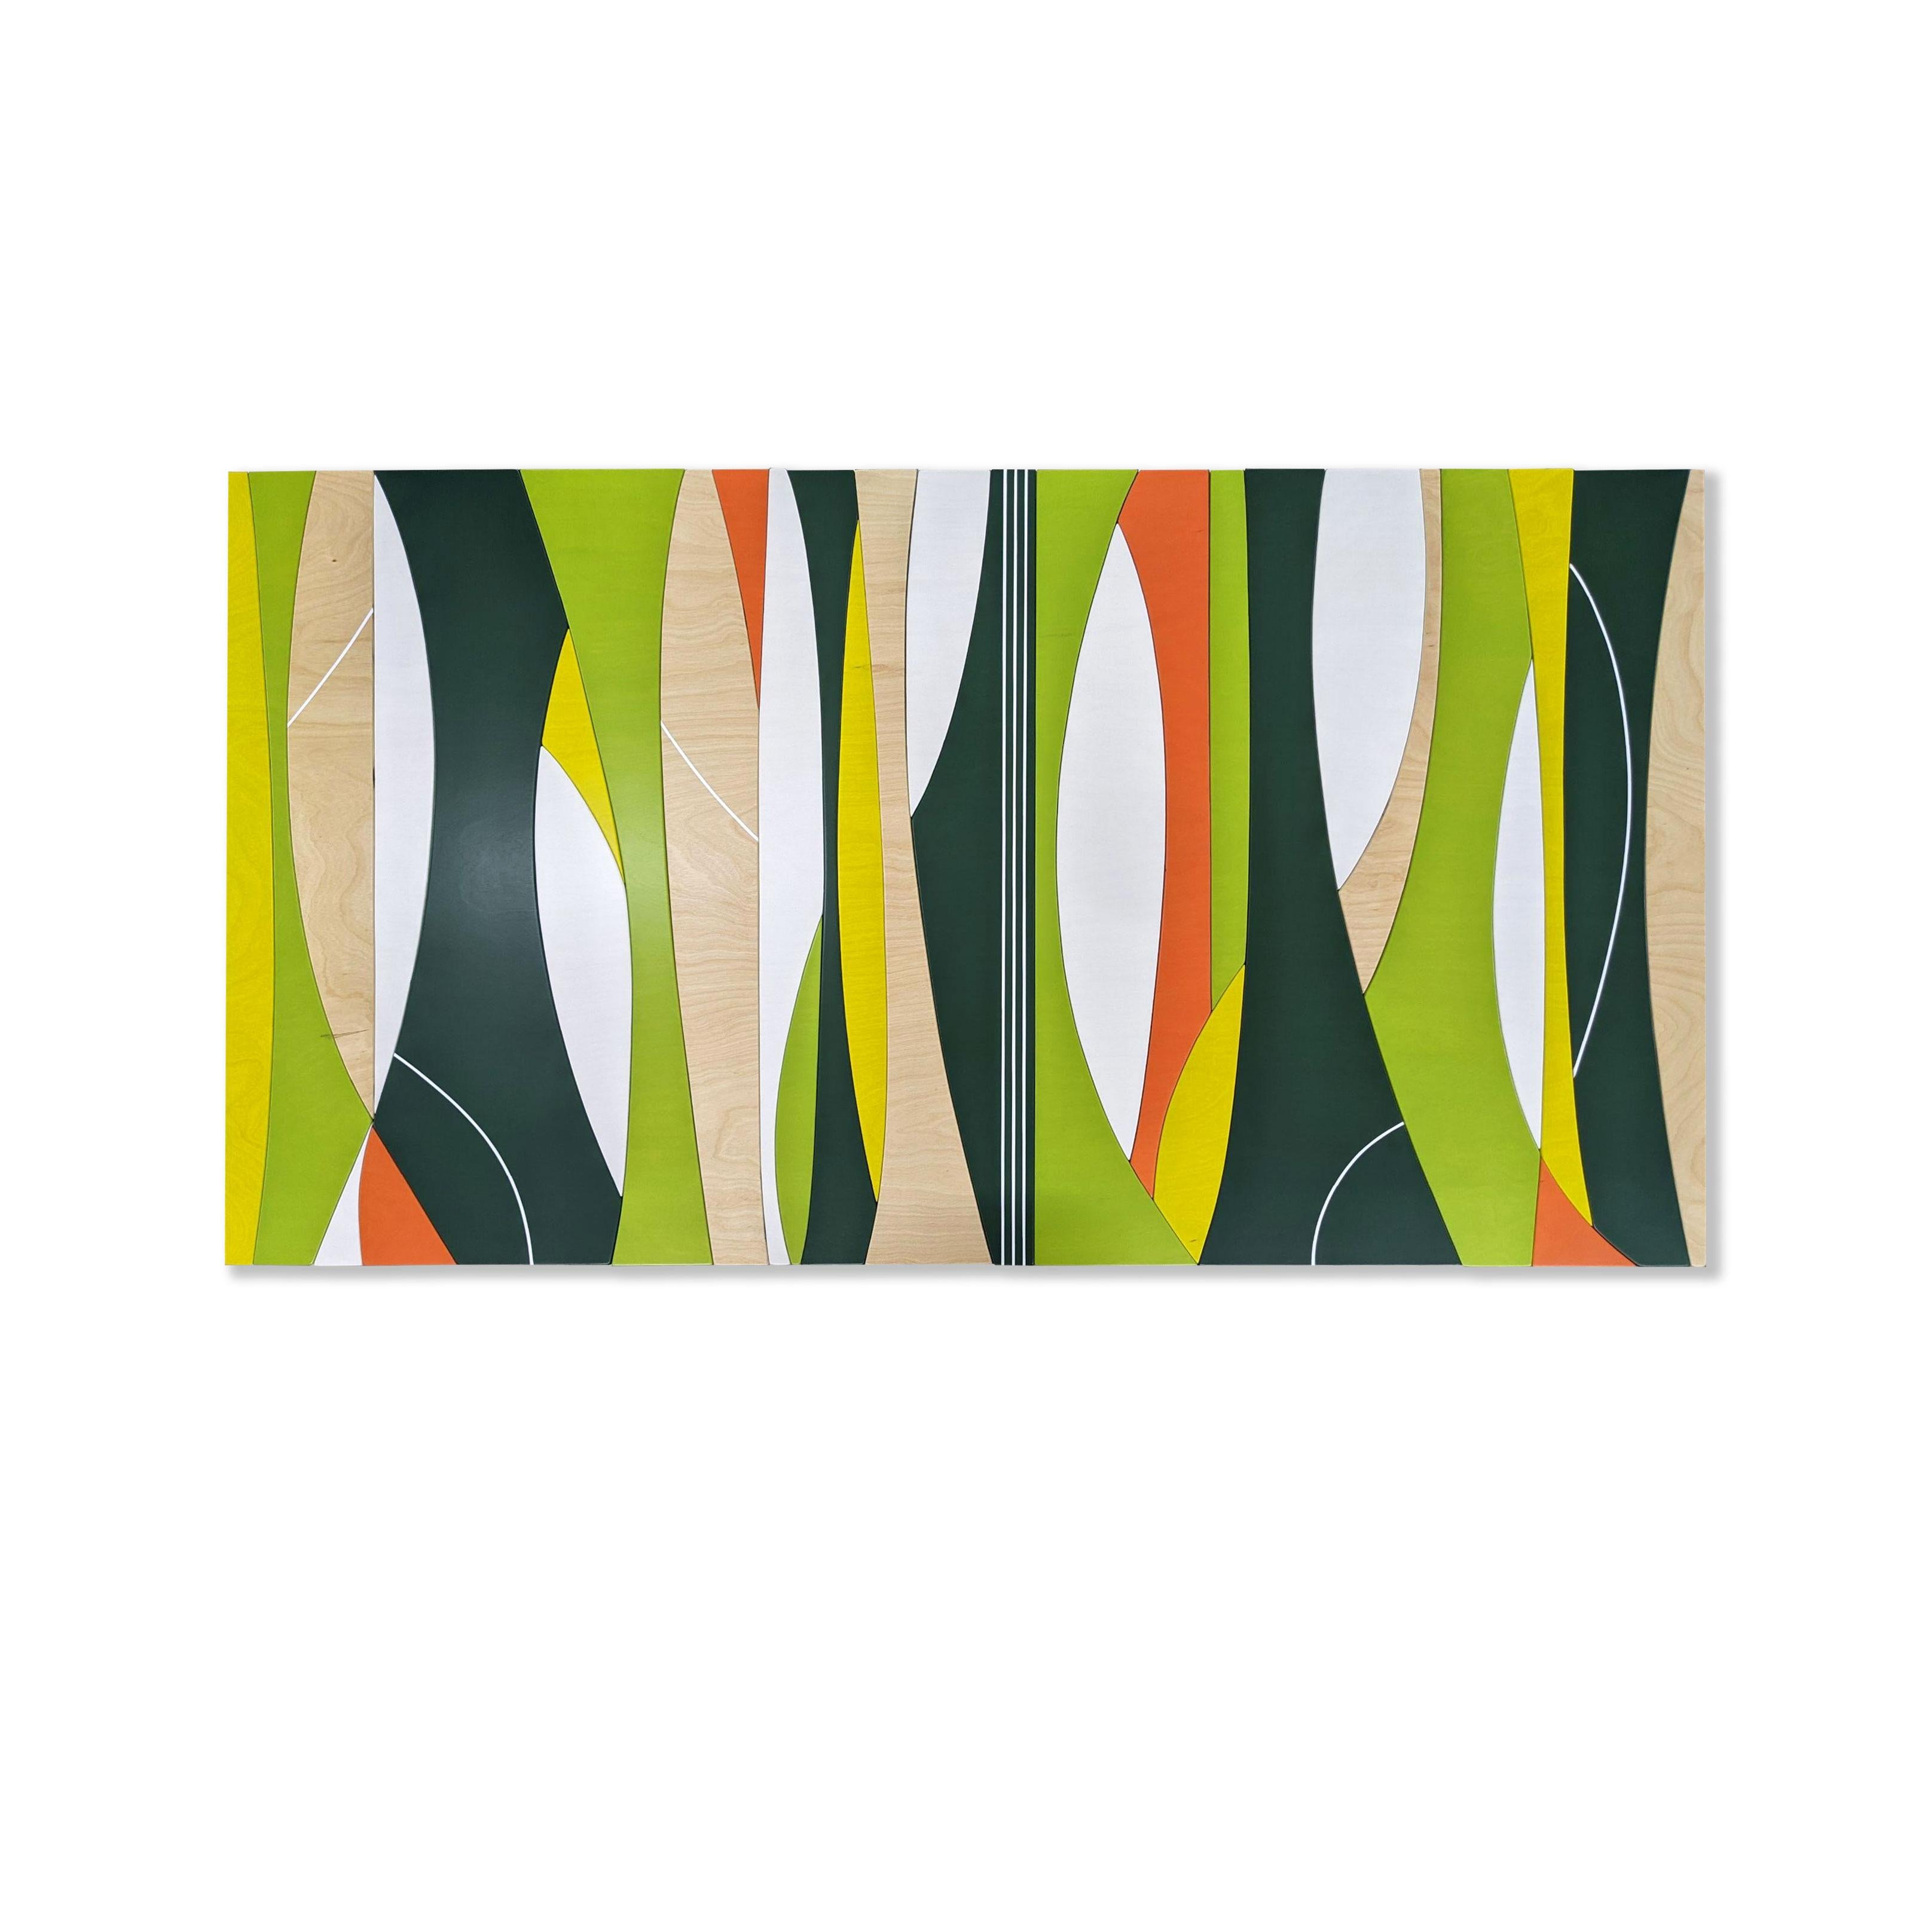 Artwork made by acrylic washes on birch.

Small Pop series are minimalist driven, wood wall sculptures that are small and blocky and feature bright saturated colors. The pieces was inspired by my love for simple bold colors and modernist repeating